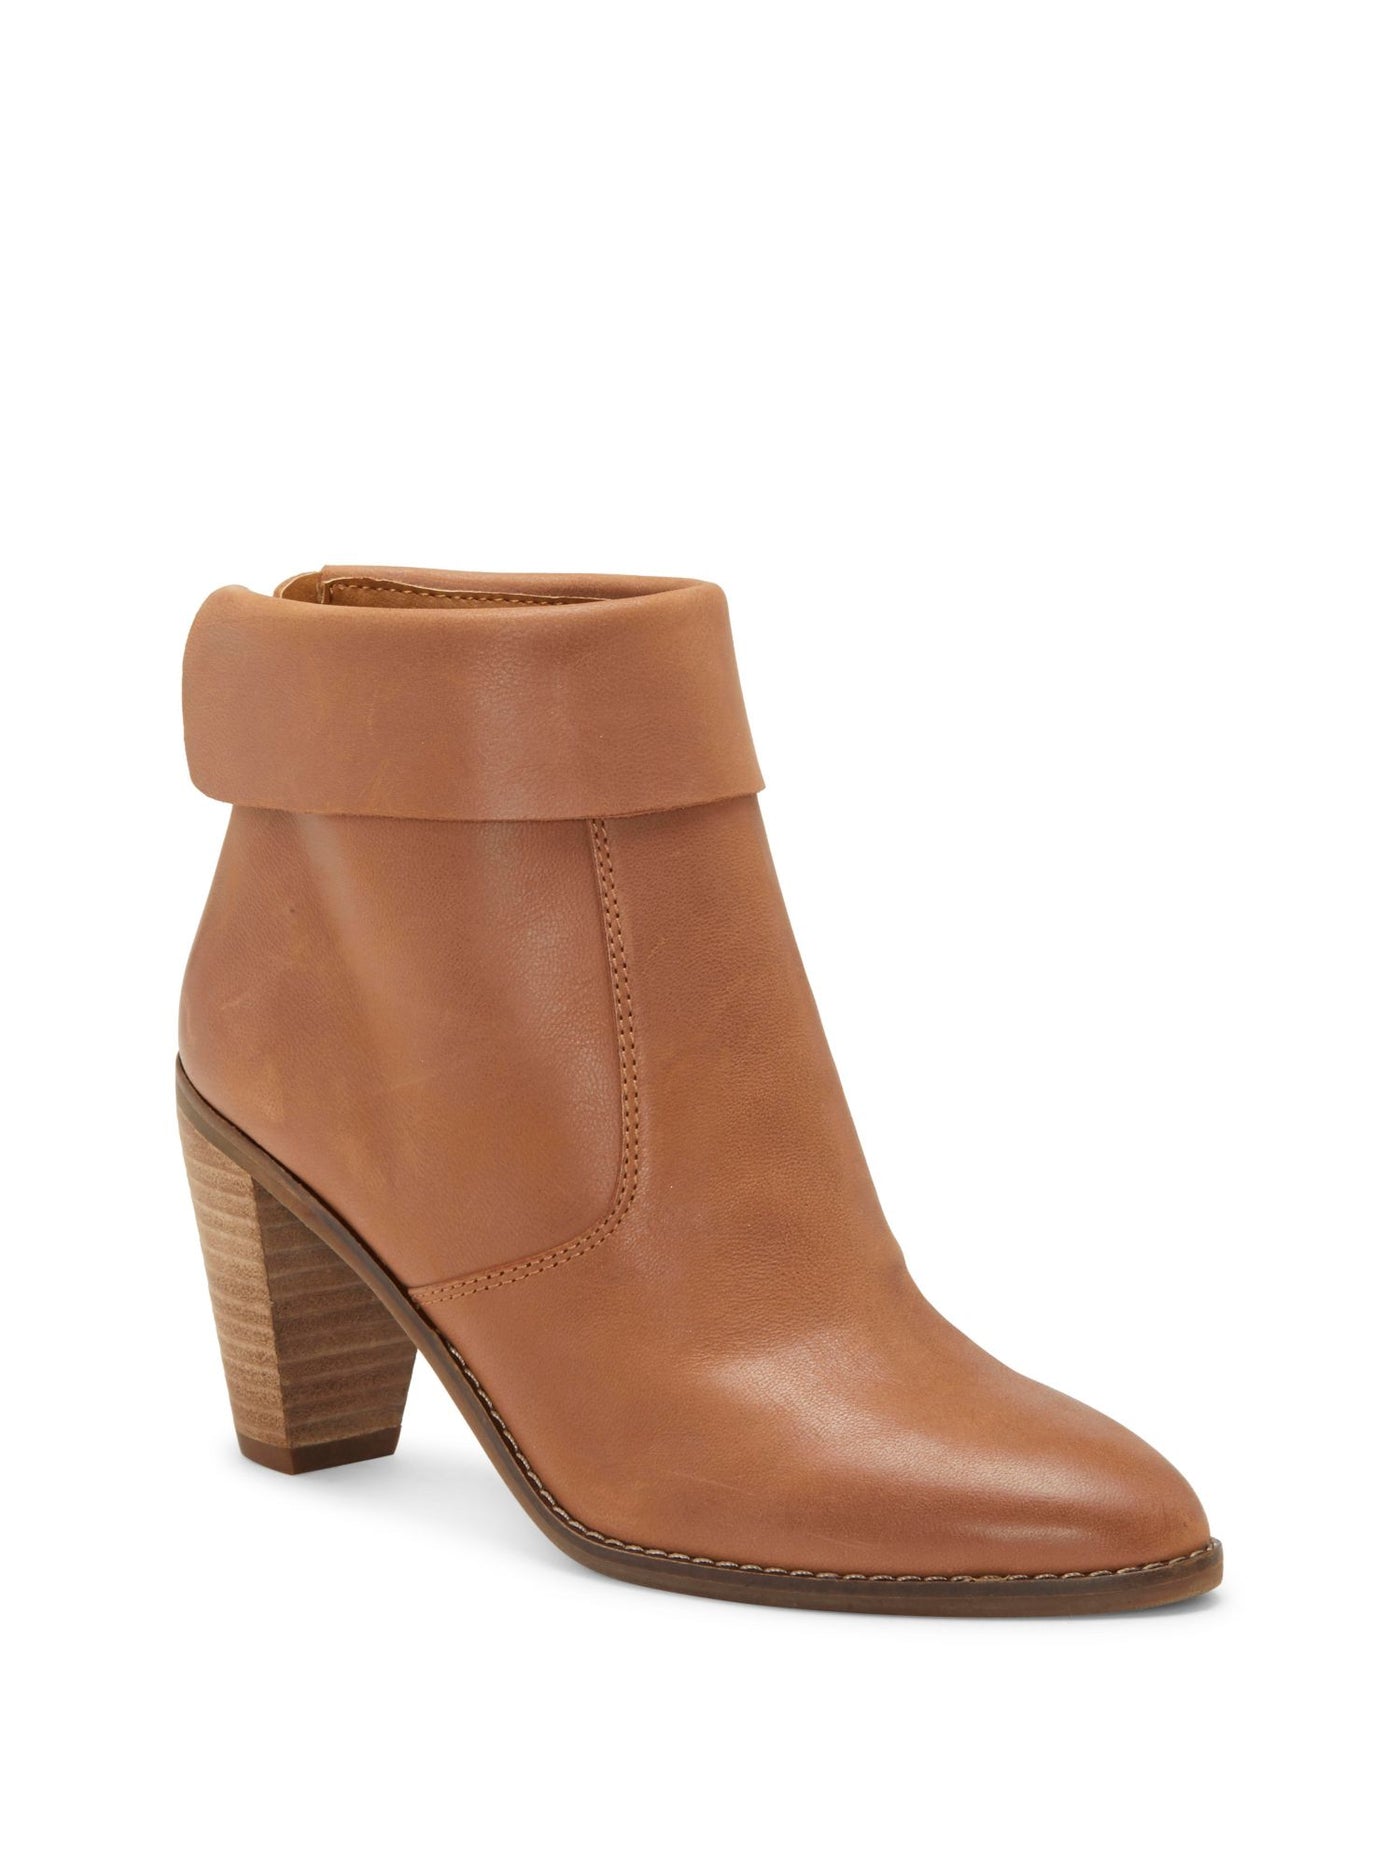 LUCKY BRAND Womens Brown Cuffed Comfort Nycott Almond Toe Stacked Heel Zip-Up Leather Booties 9 M